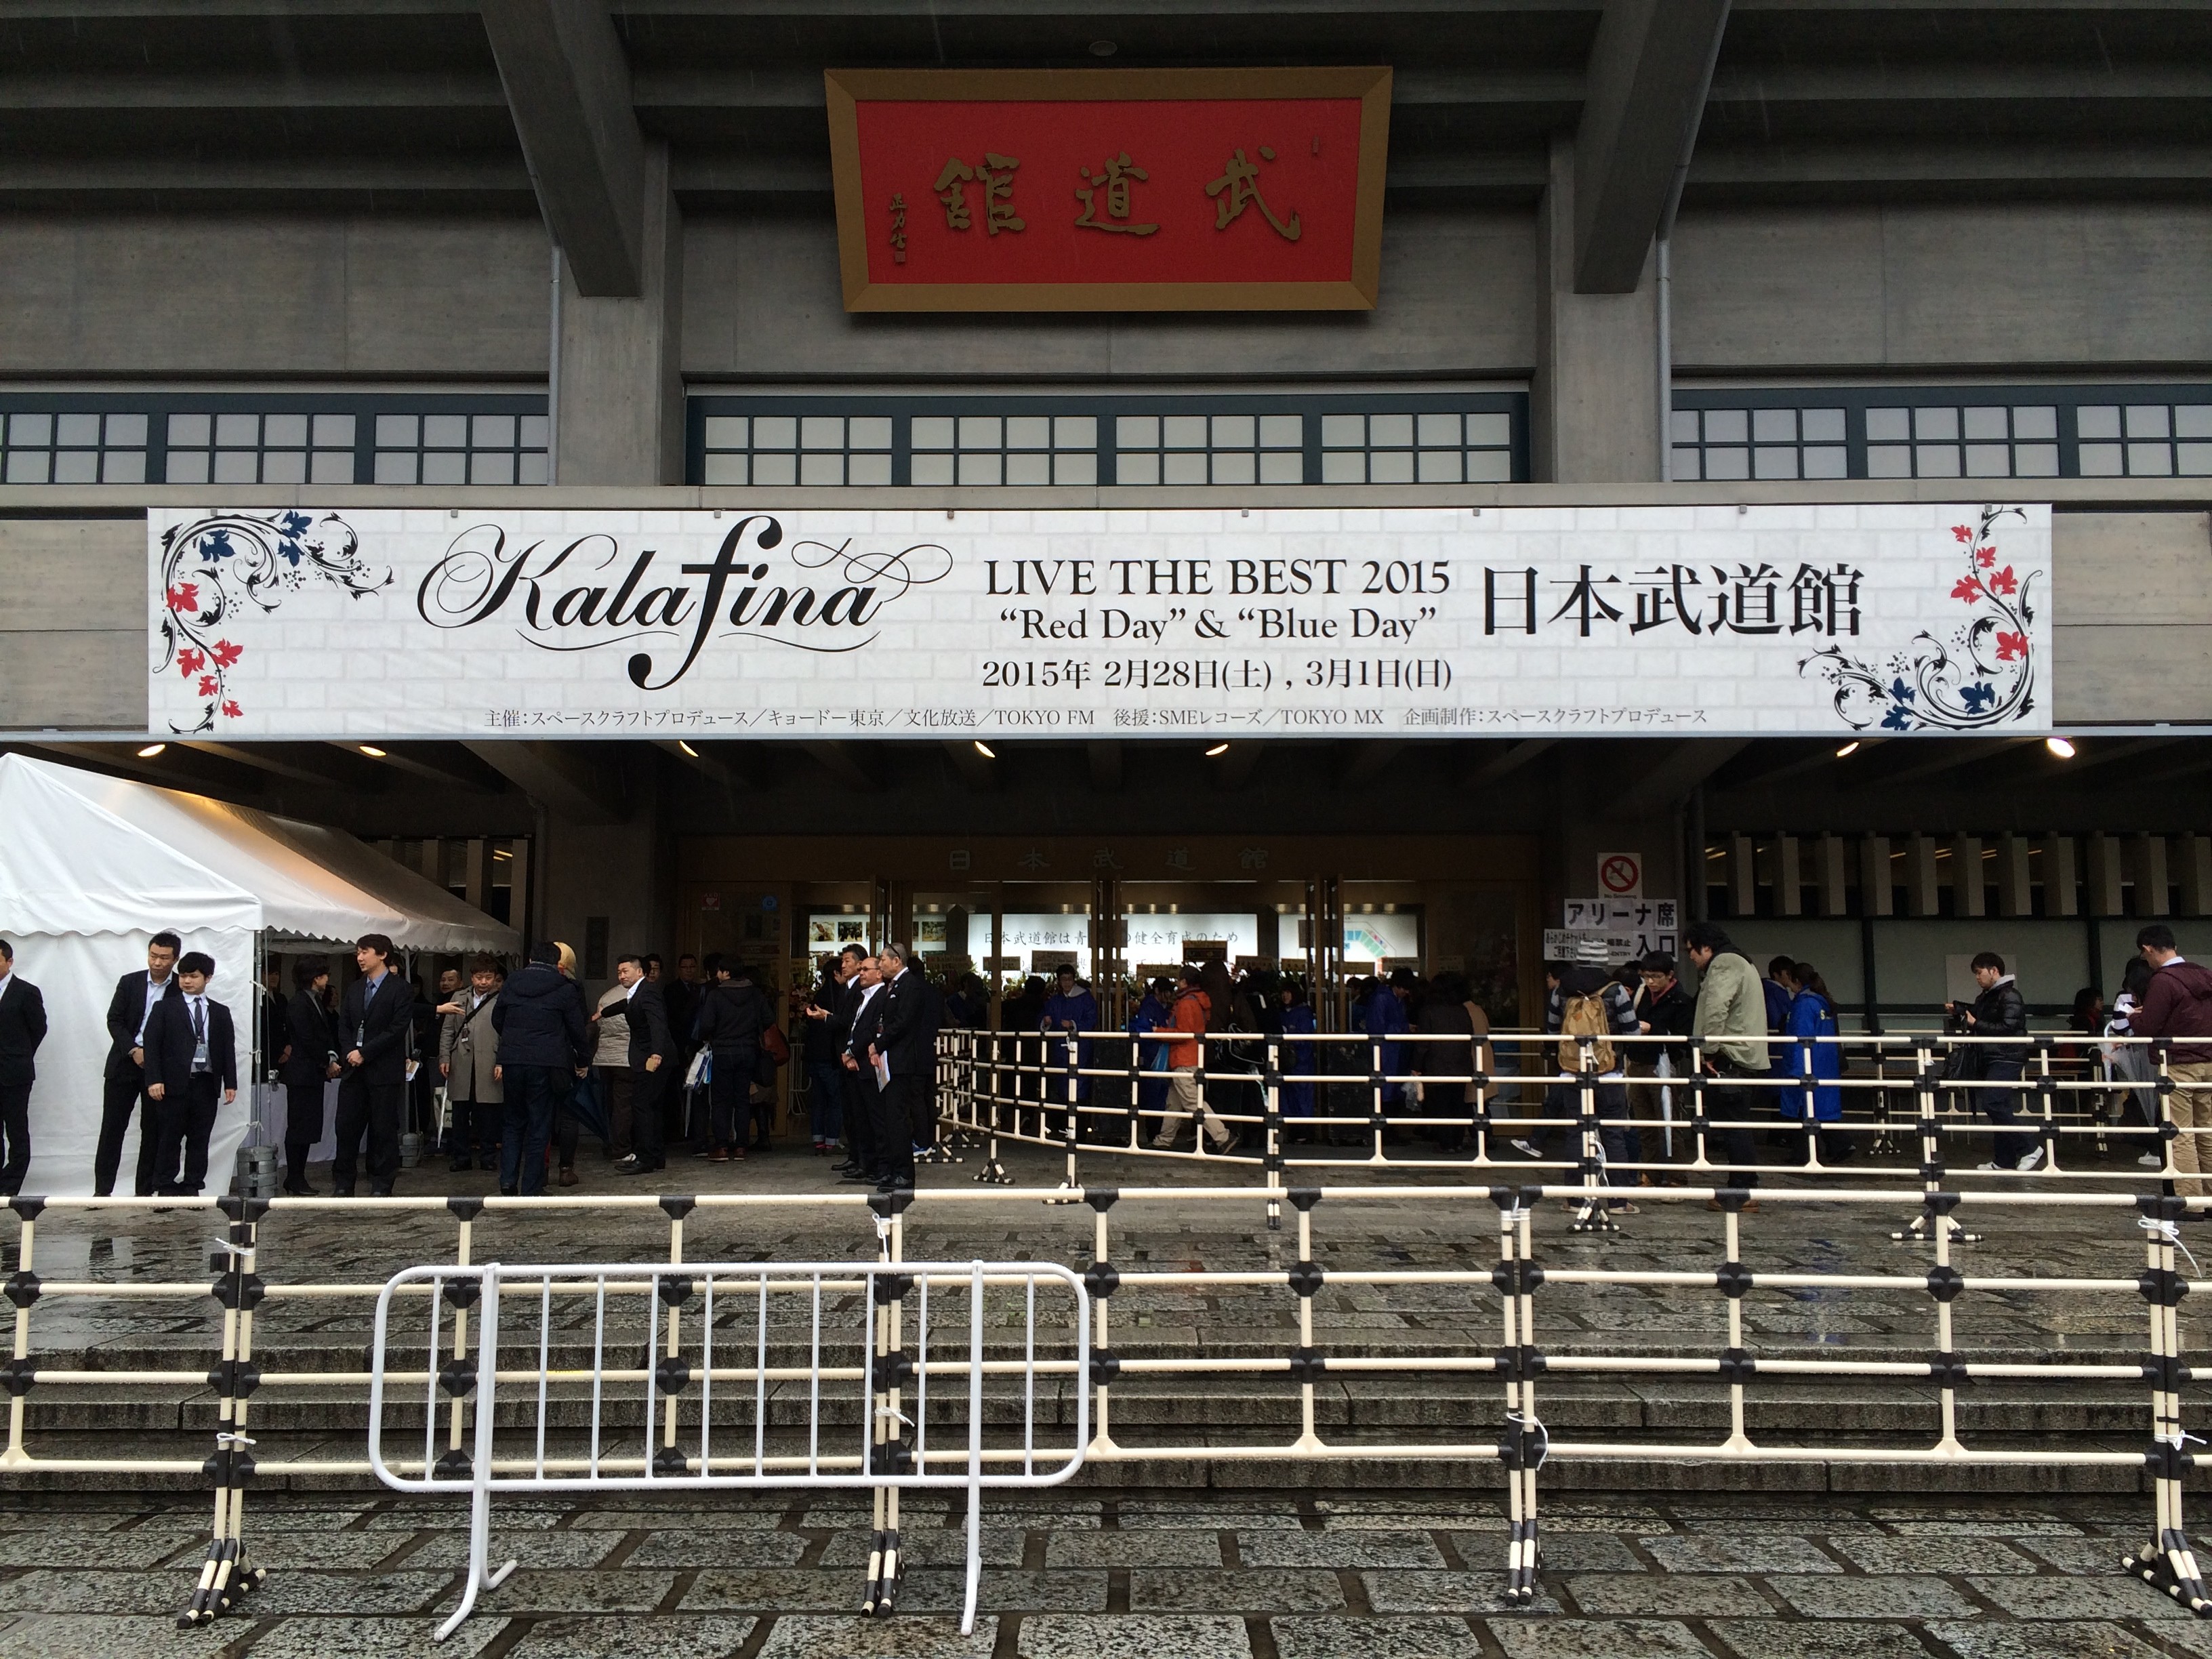 Kalafina Live The Best 15 Red Day Blue Day 感想 ぐだぐだめたる